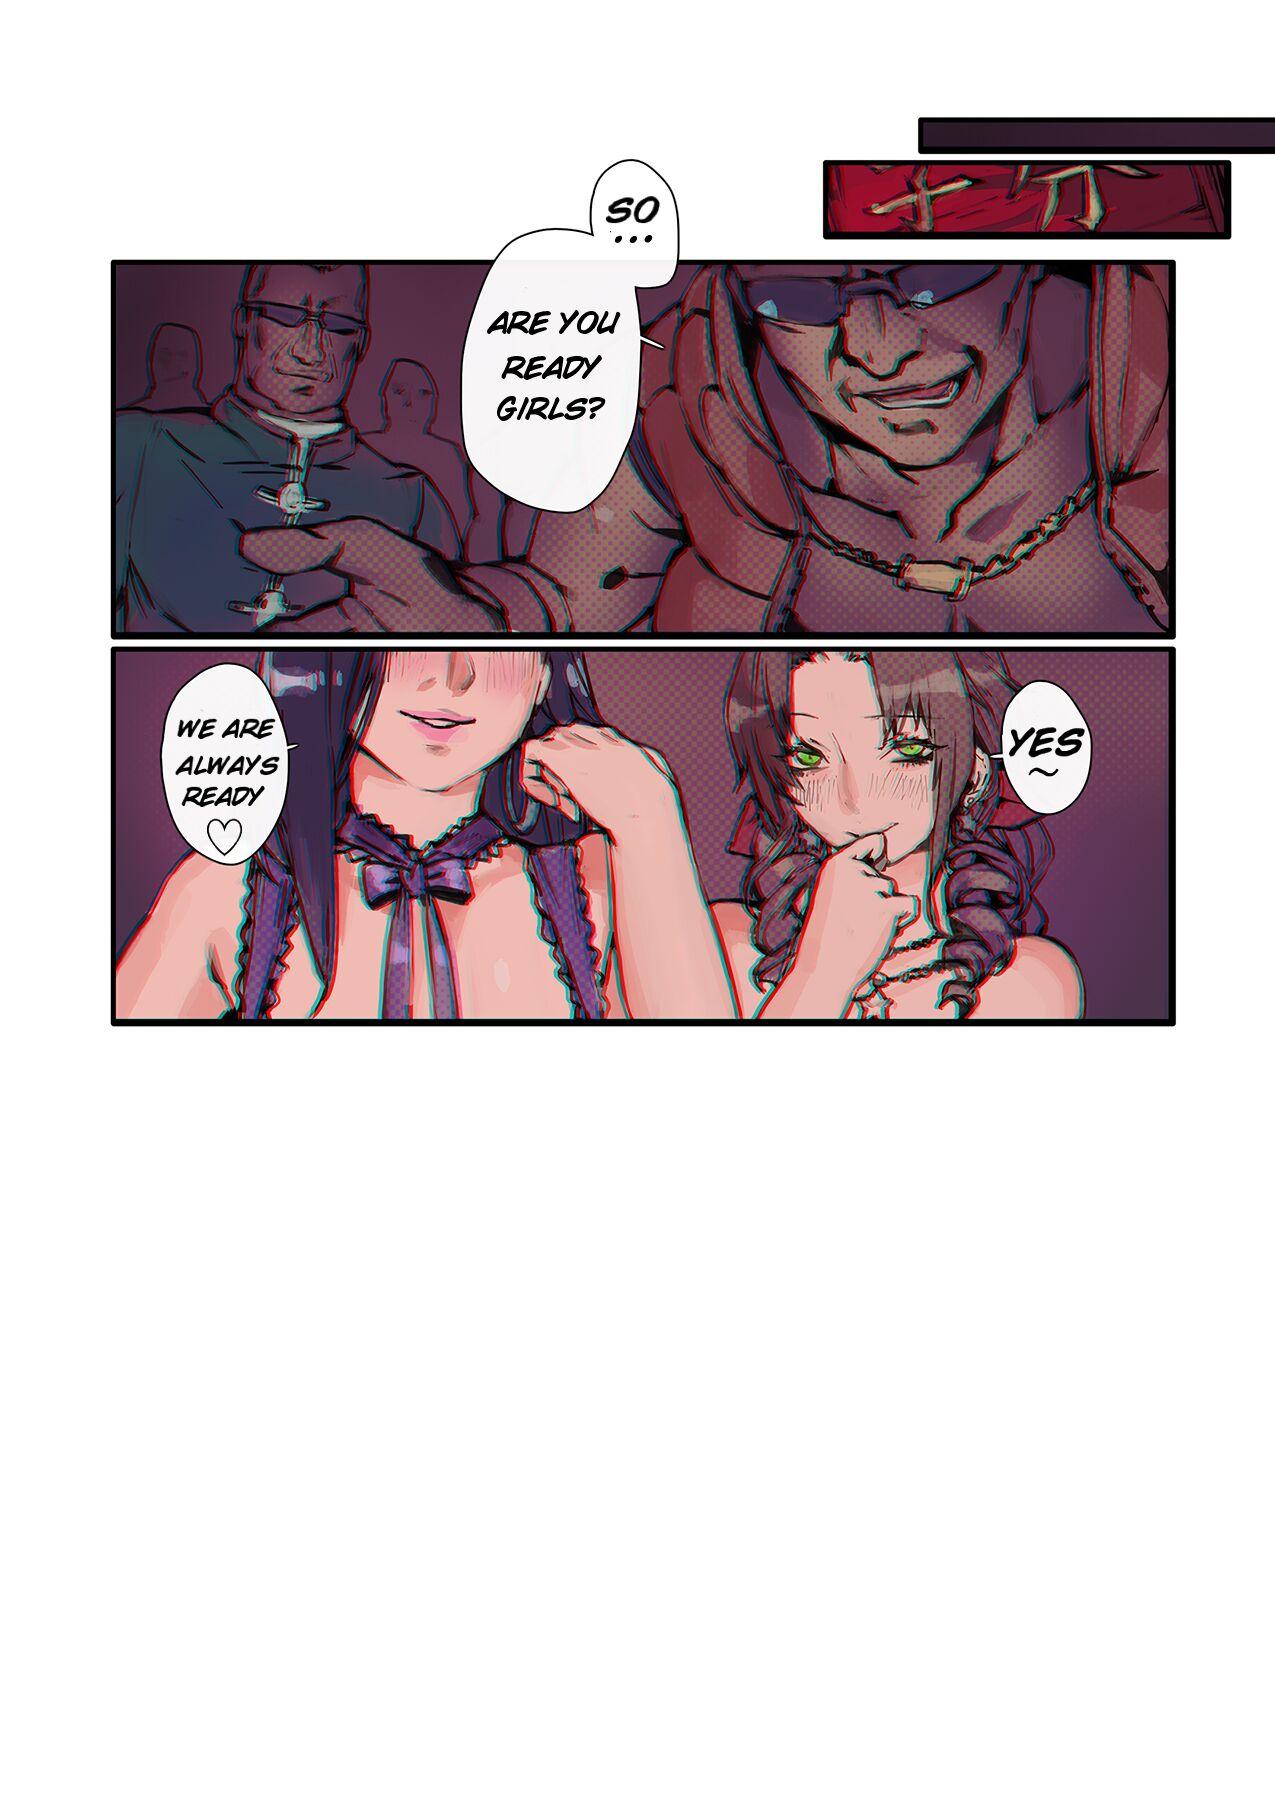 Bondagesex The Escort and the Flower Girl - Final fantasy vii  - Page 2